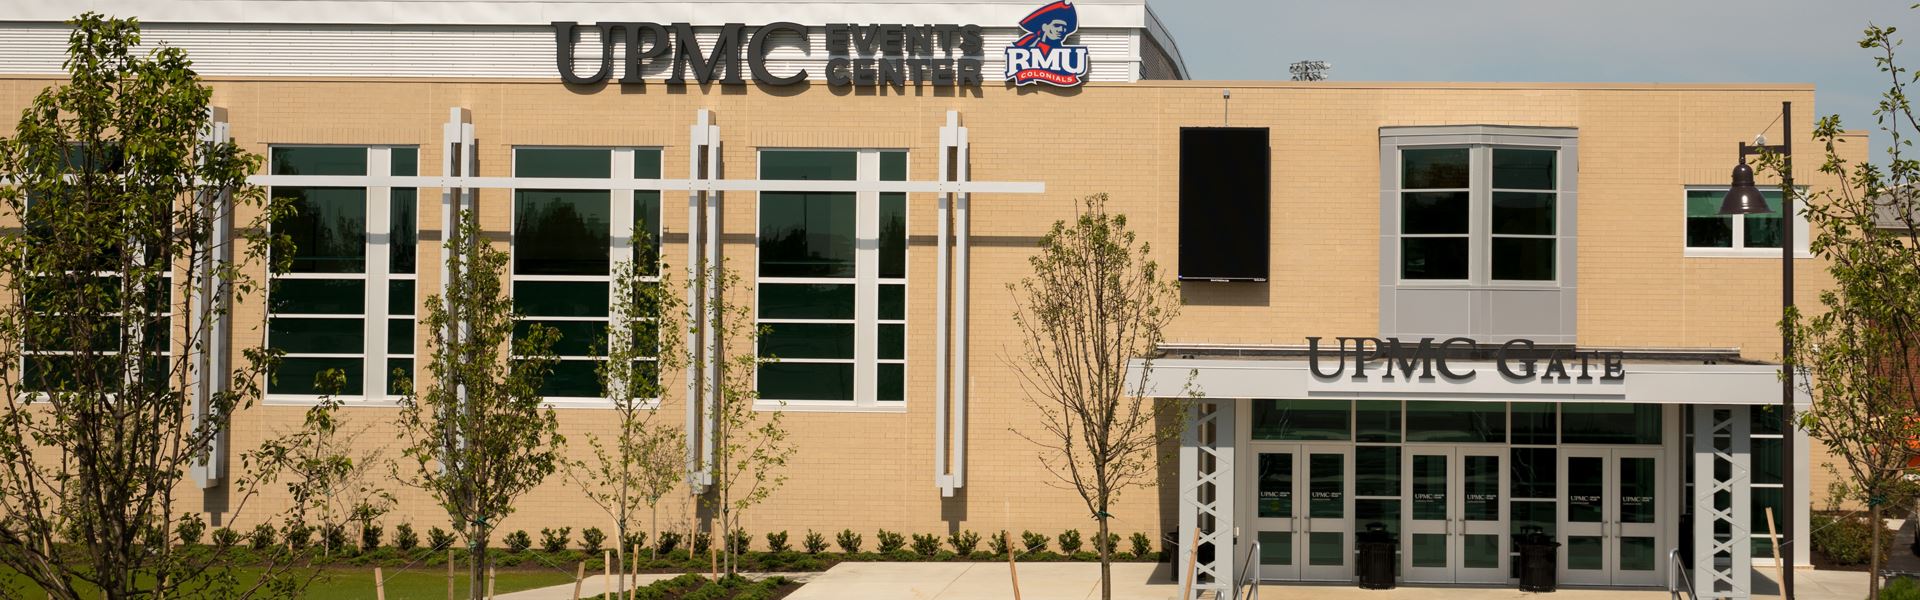 Robert Morris To Build UPMC Events Center - Northeast Conference